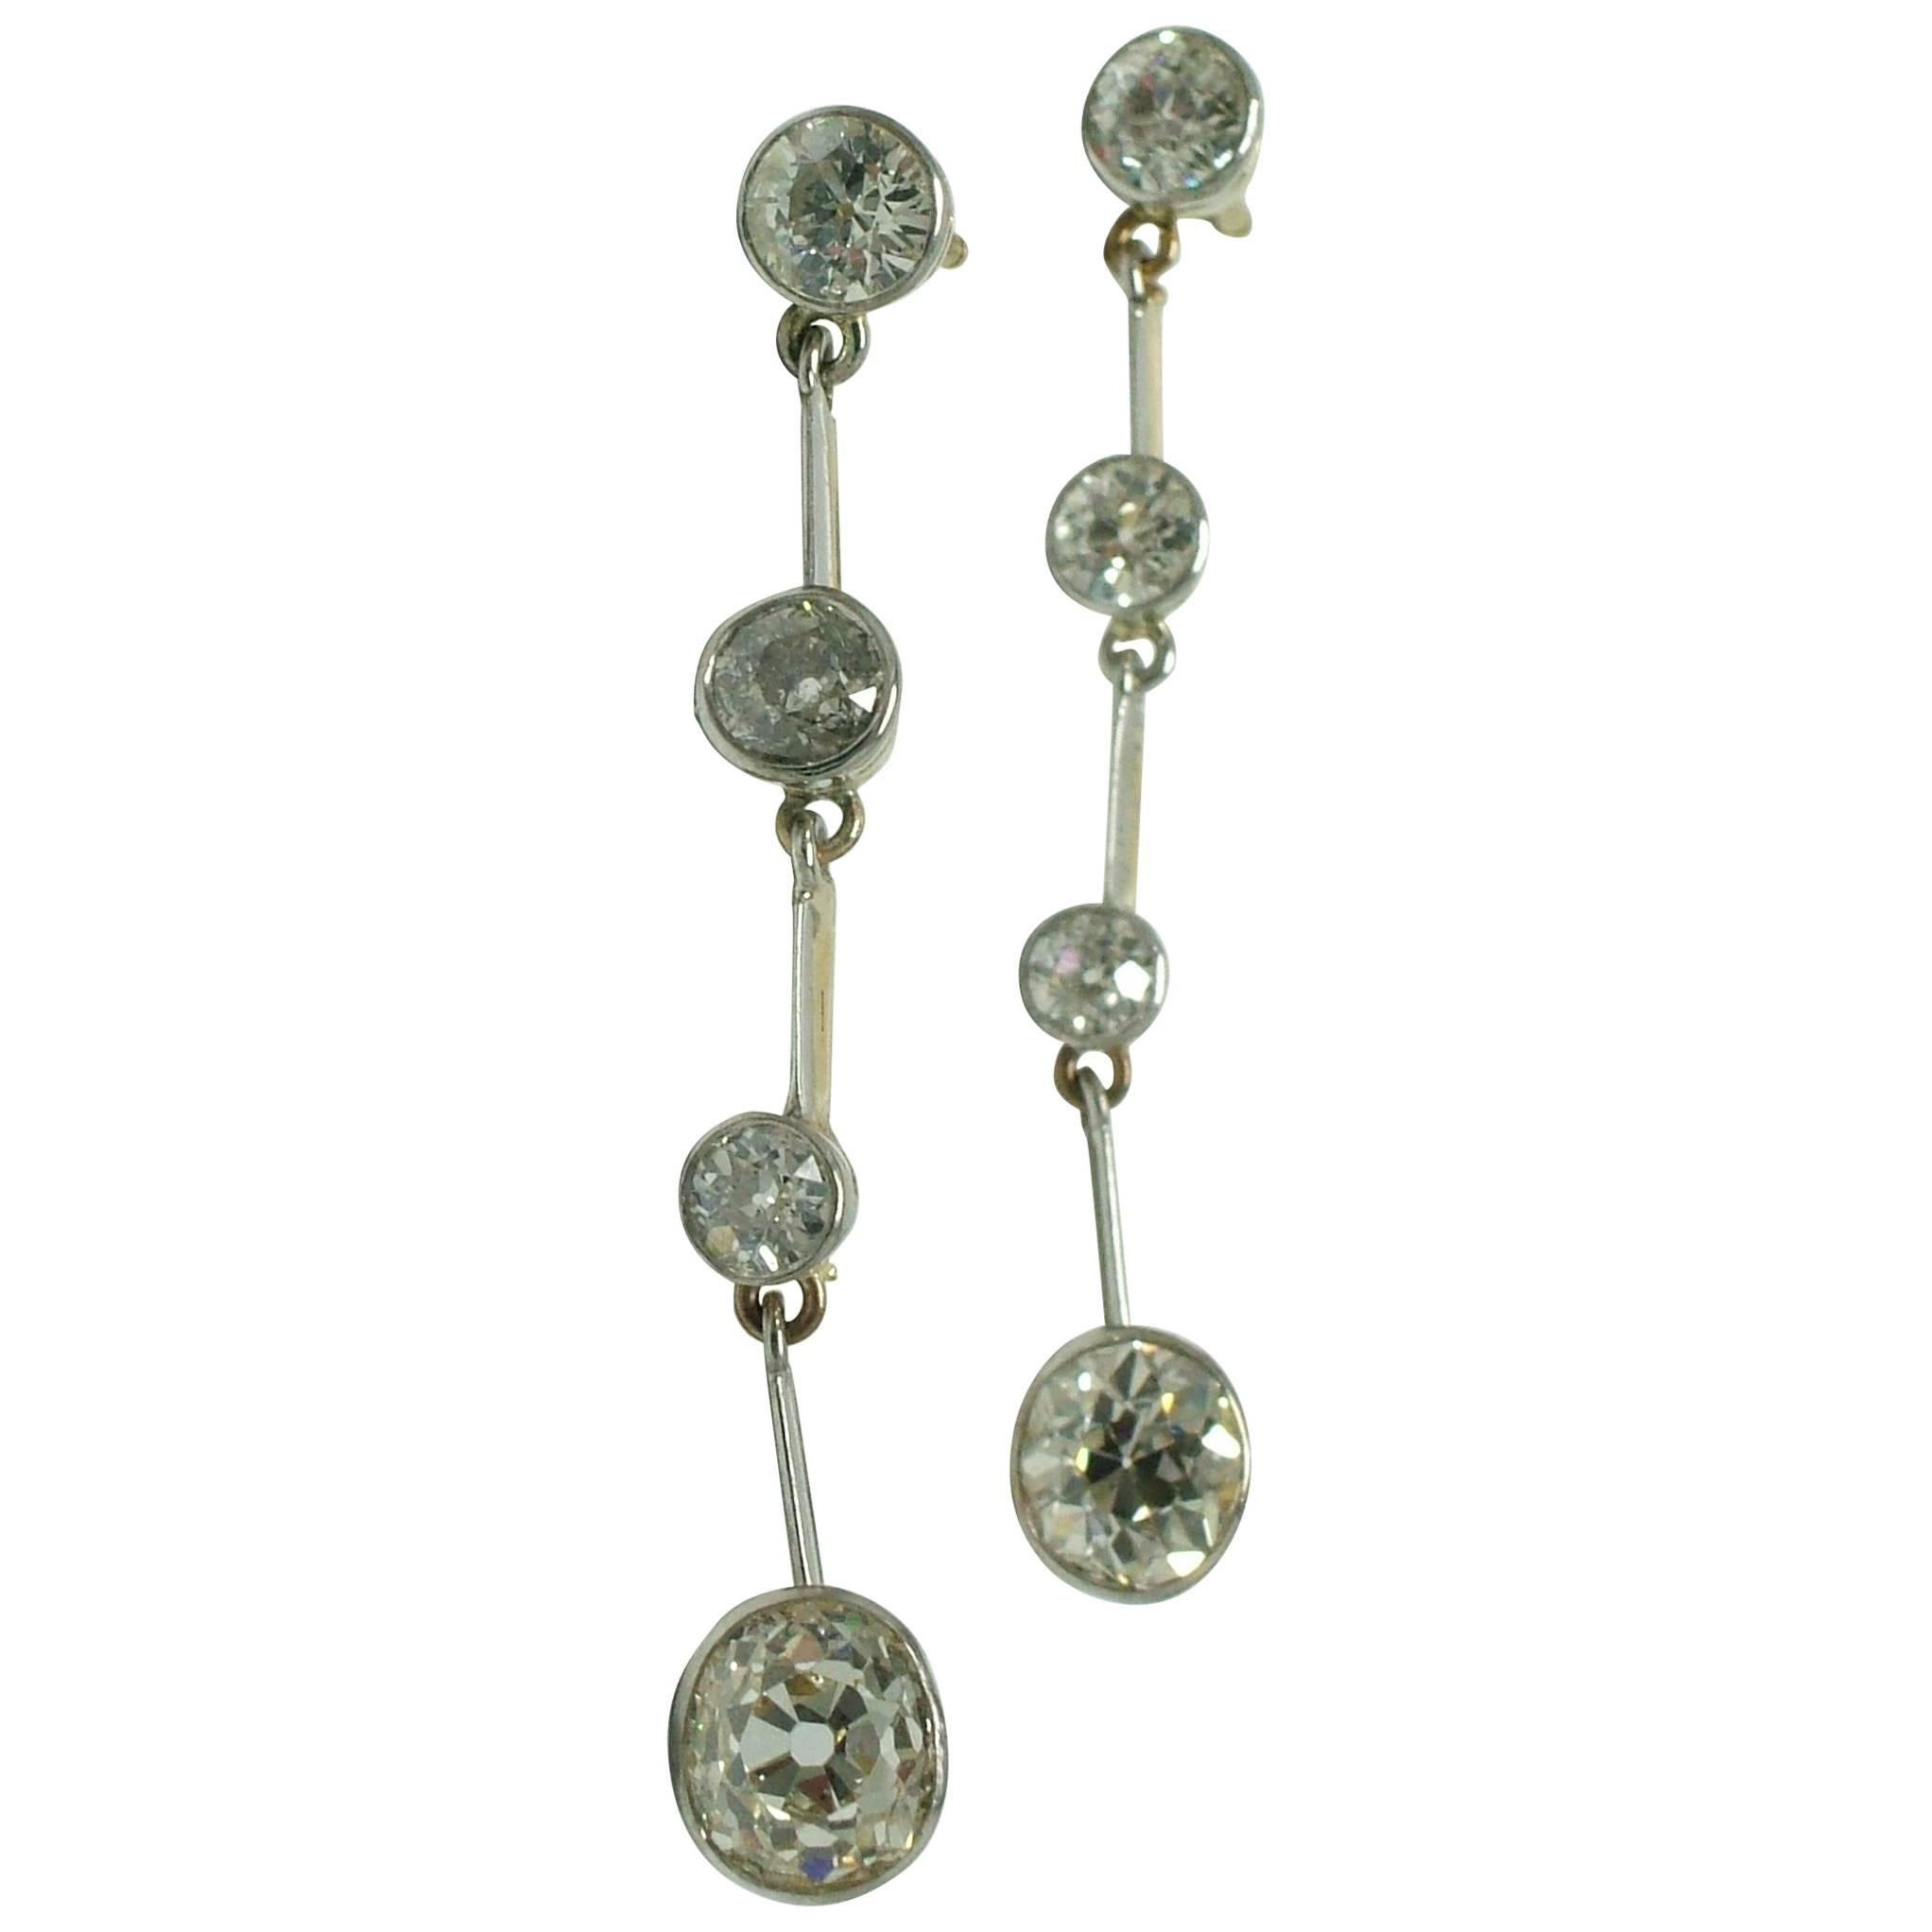 Antique diamond pendant earrings crafted in platinum over gold, featuring four pairs of bright antique old cut diamonds.